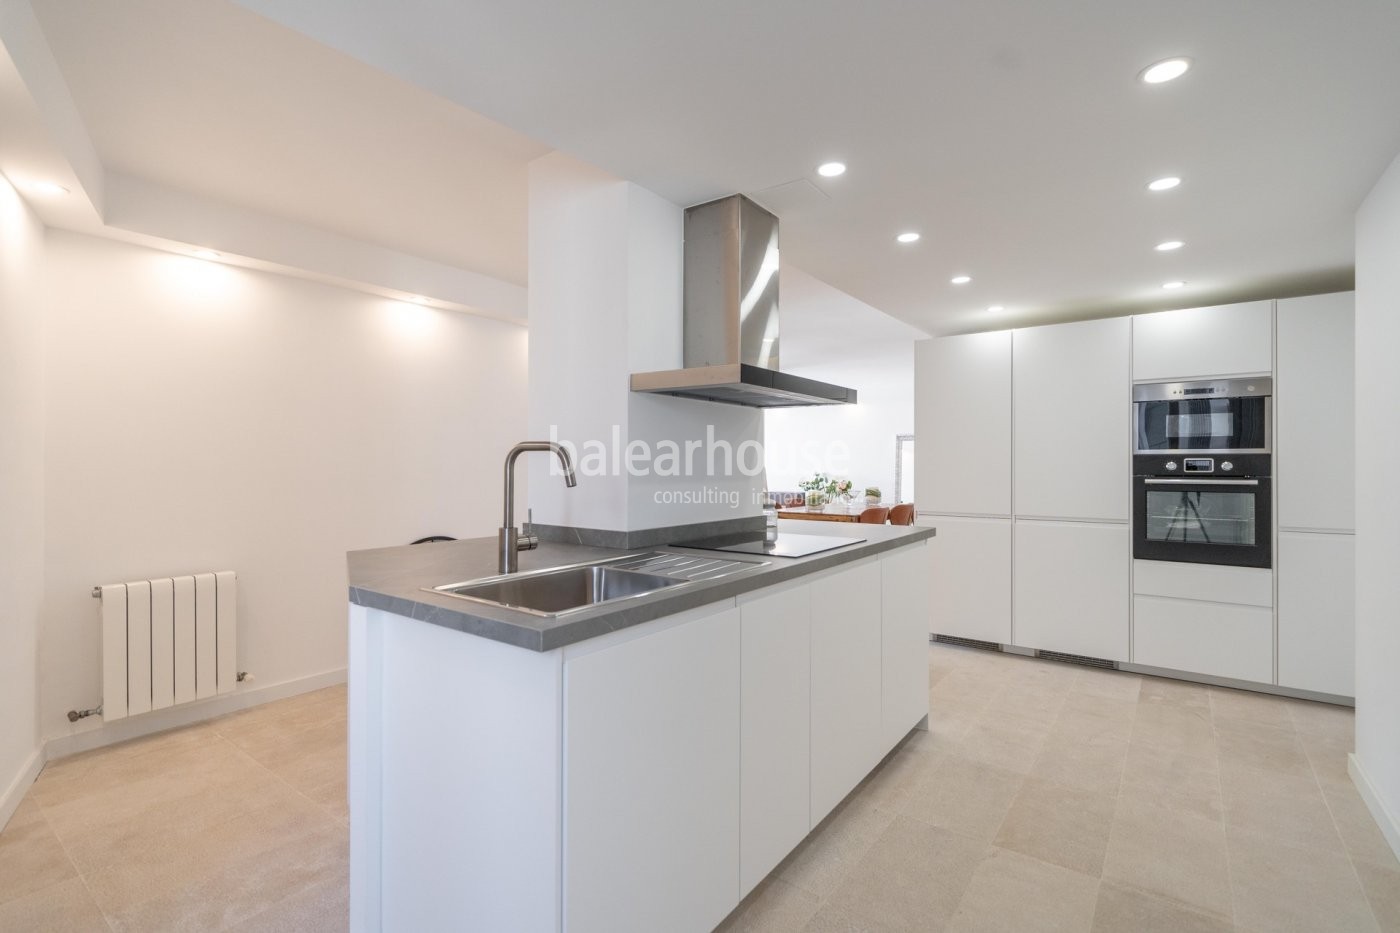 Beautifully renovated apartment full of natural light and style in an outstanding Palma location.